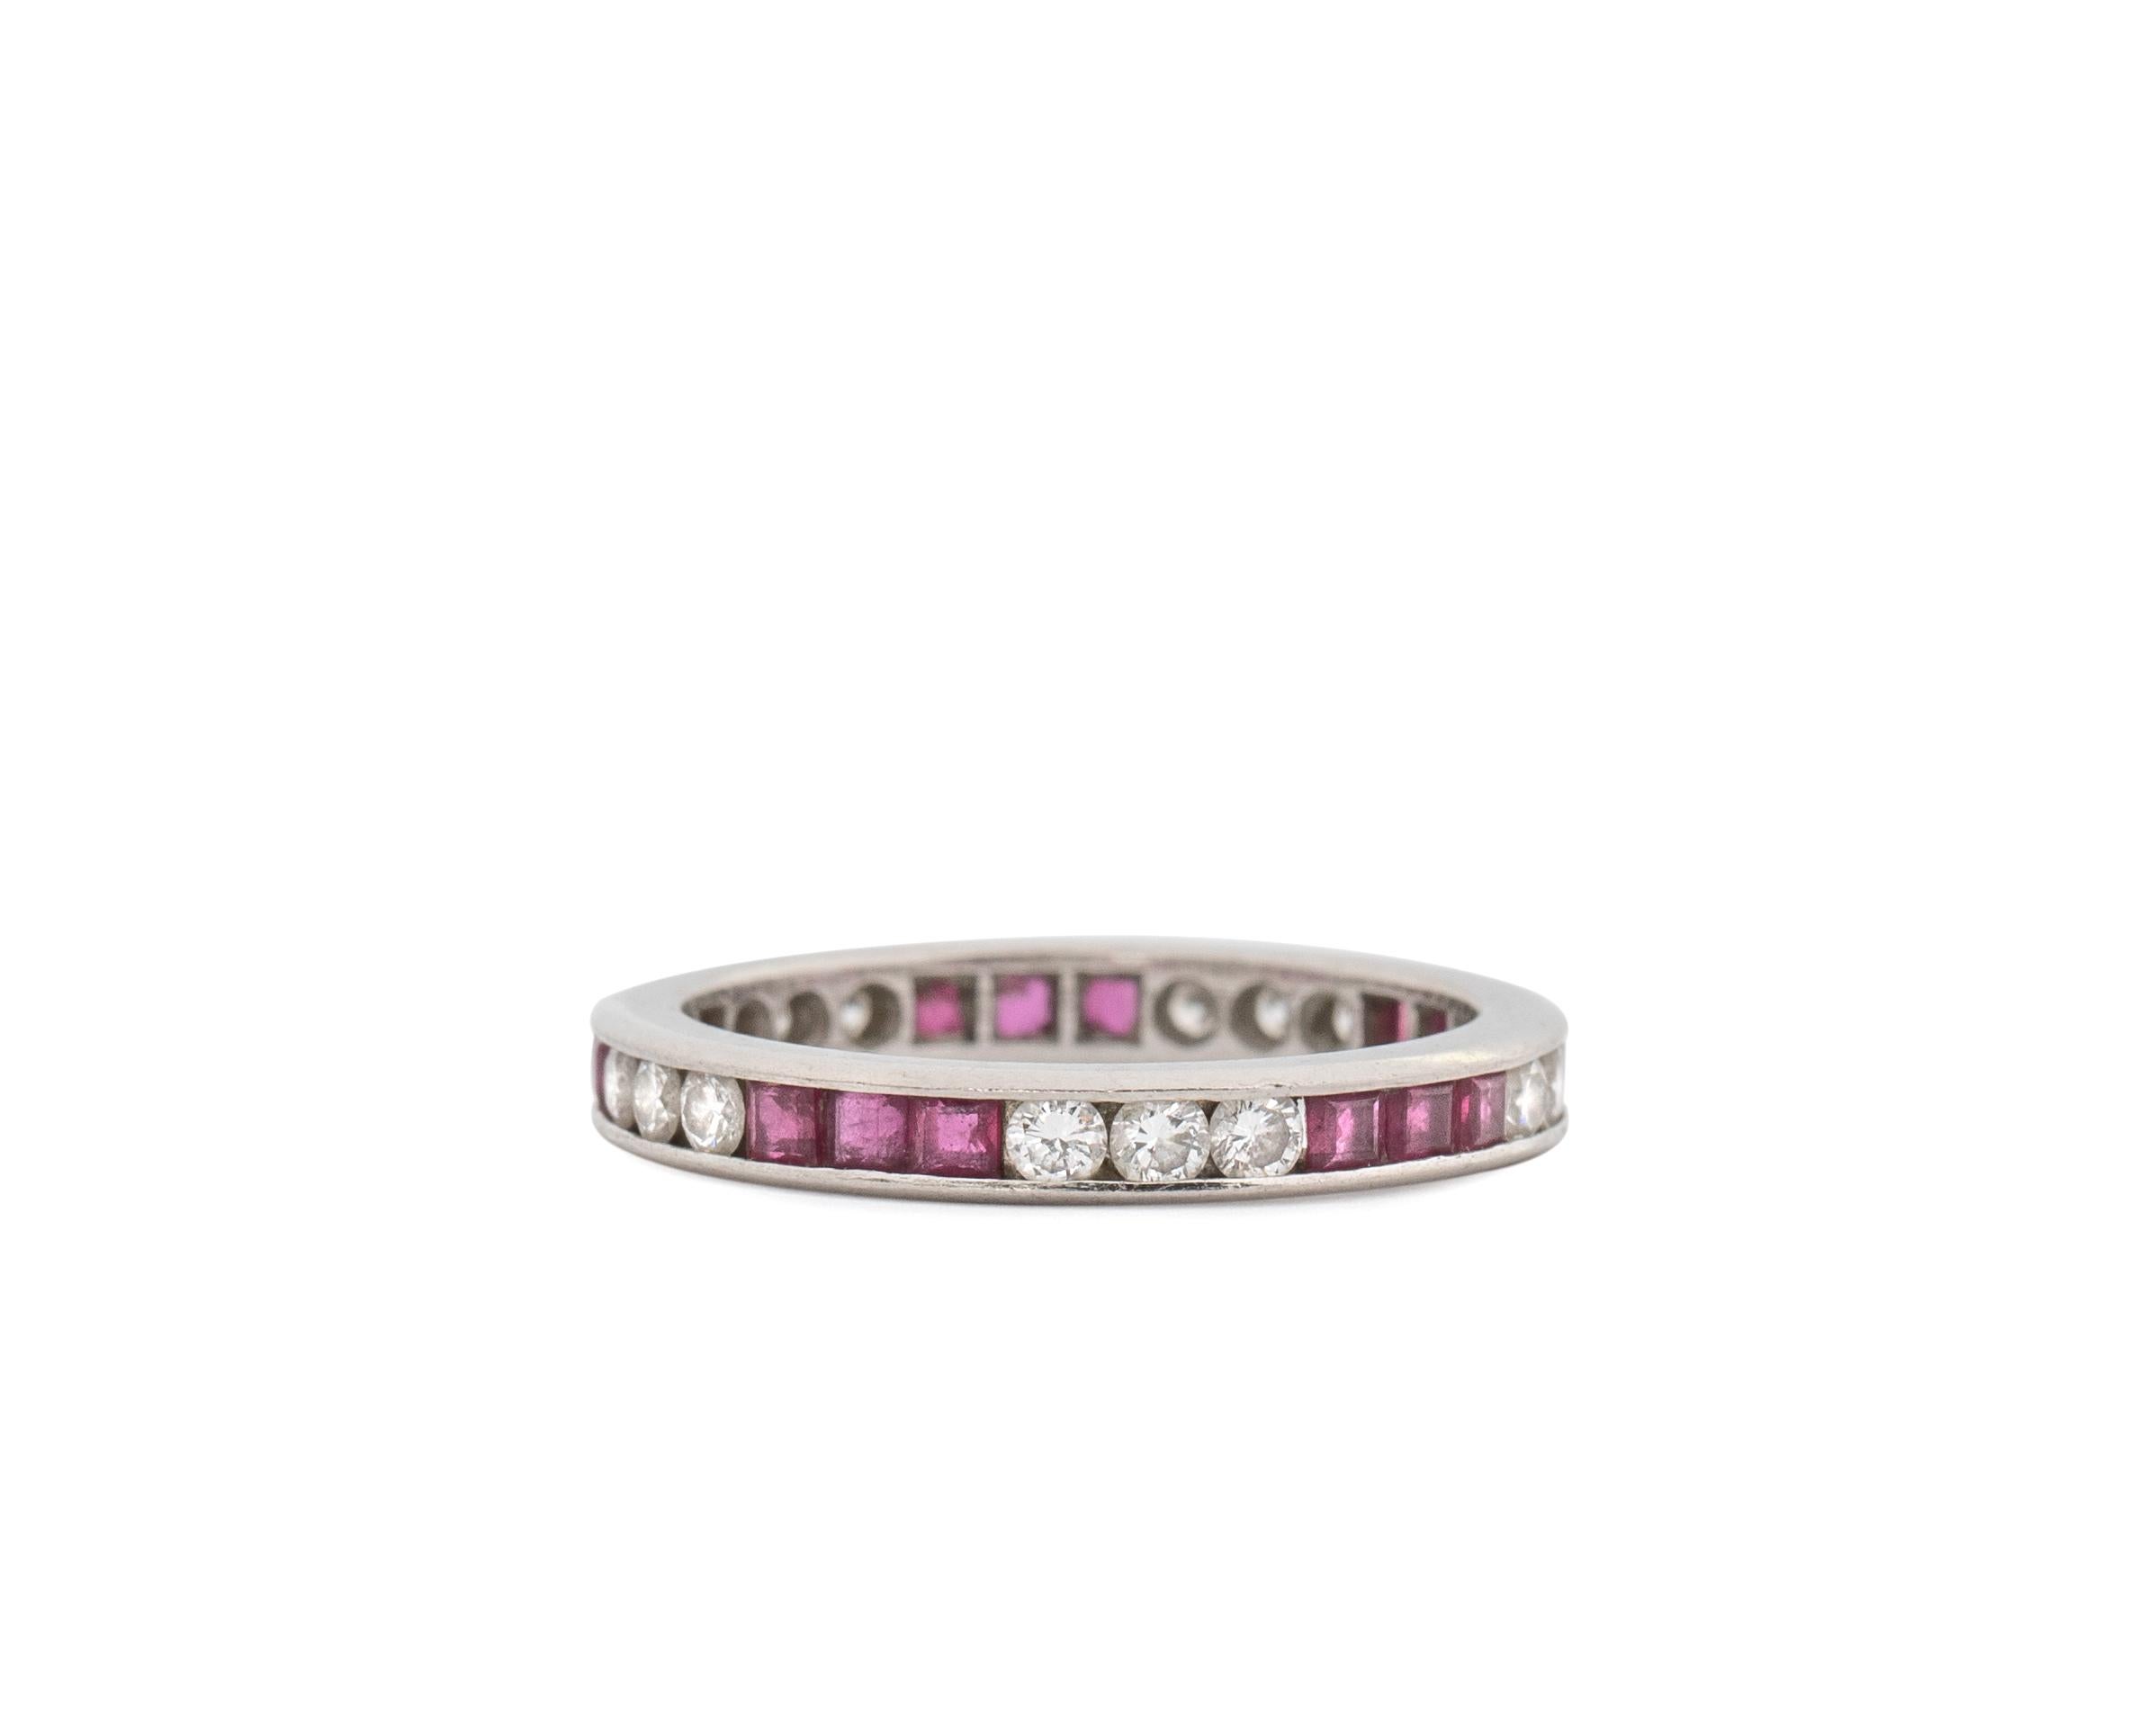 Retro 1970s Diamond and Ruby Ring Band in Platinum